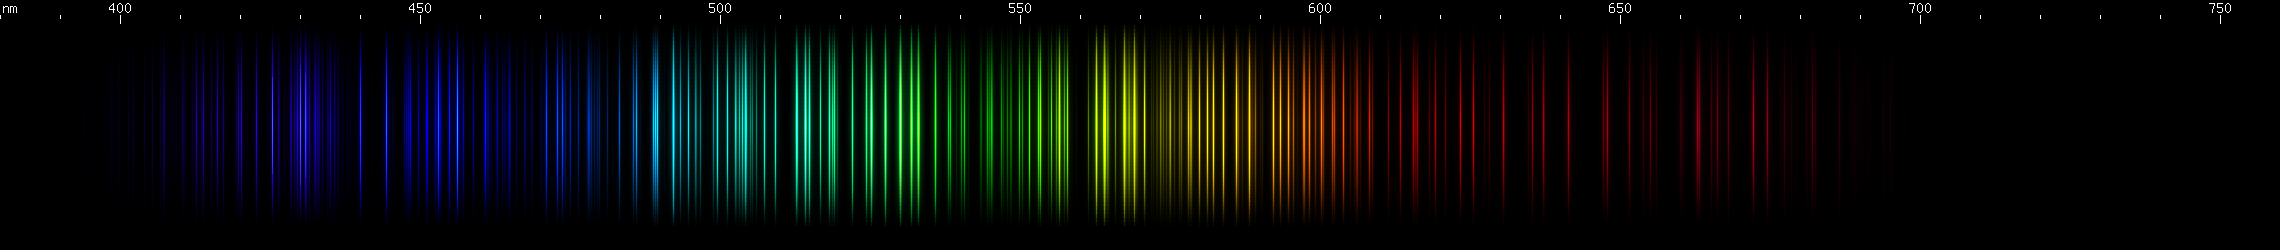 Spectral Lines of Holmium